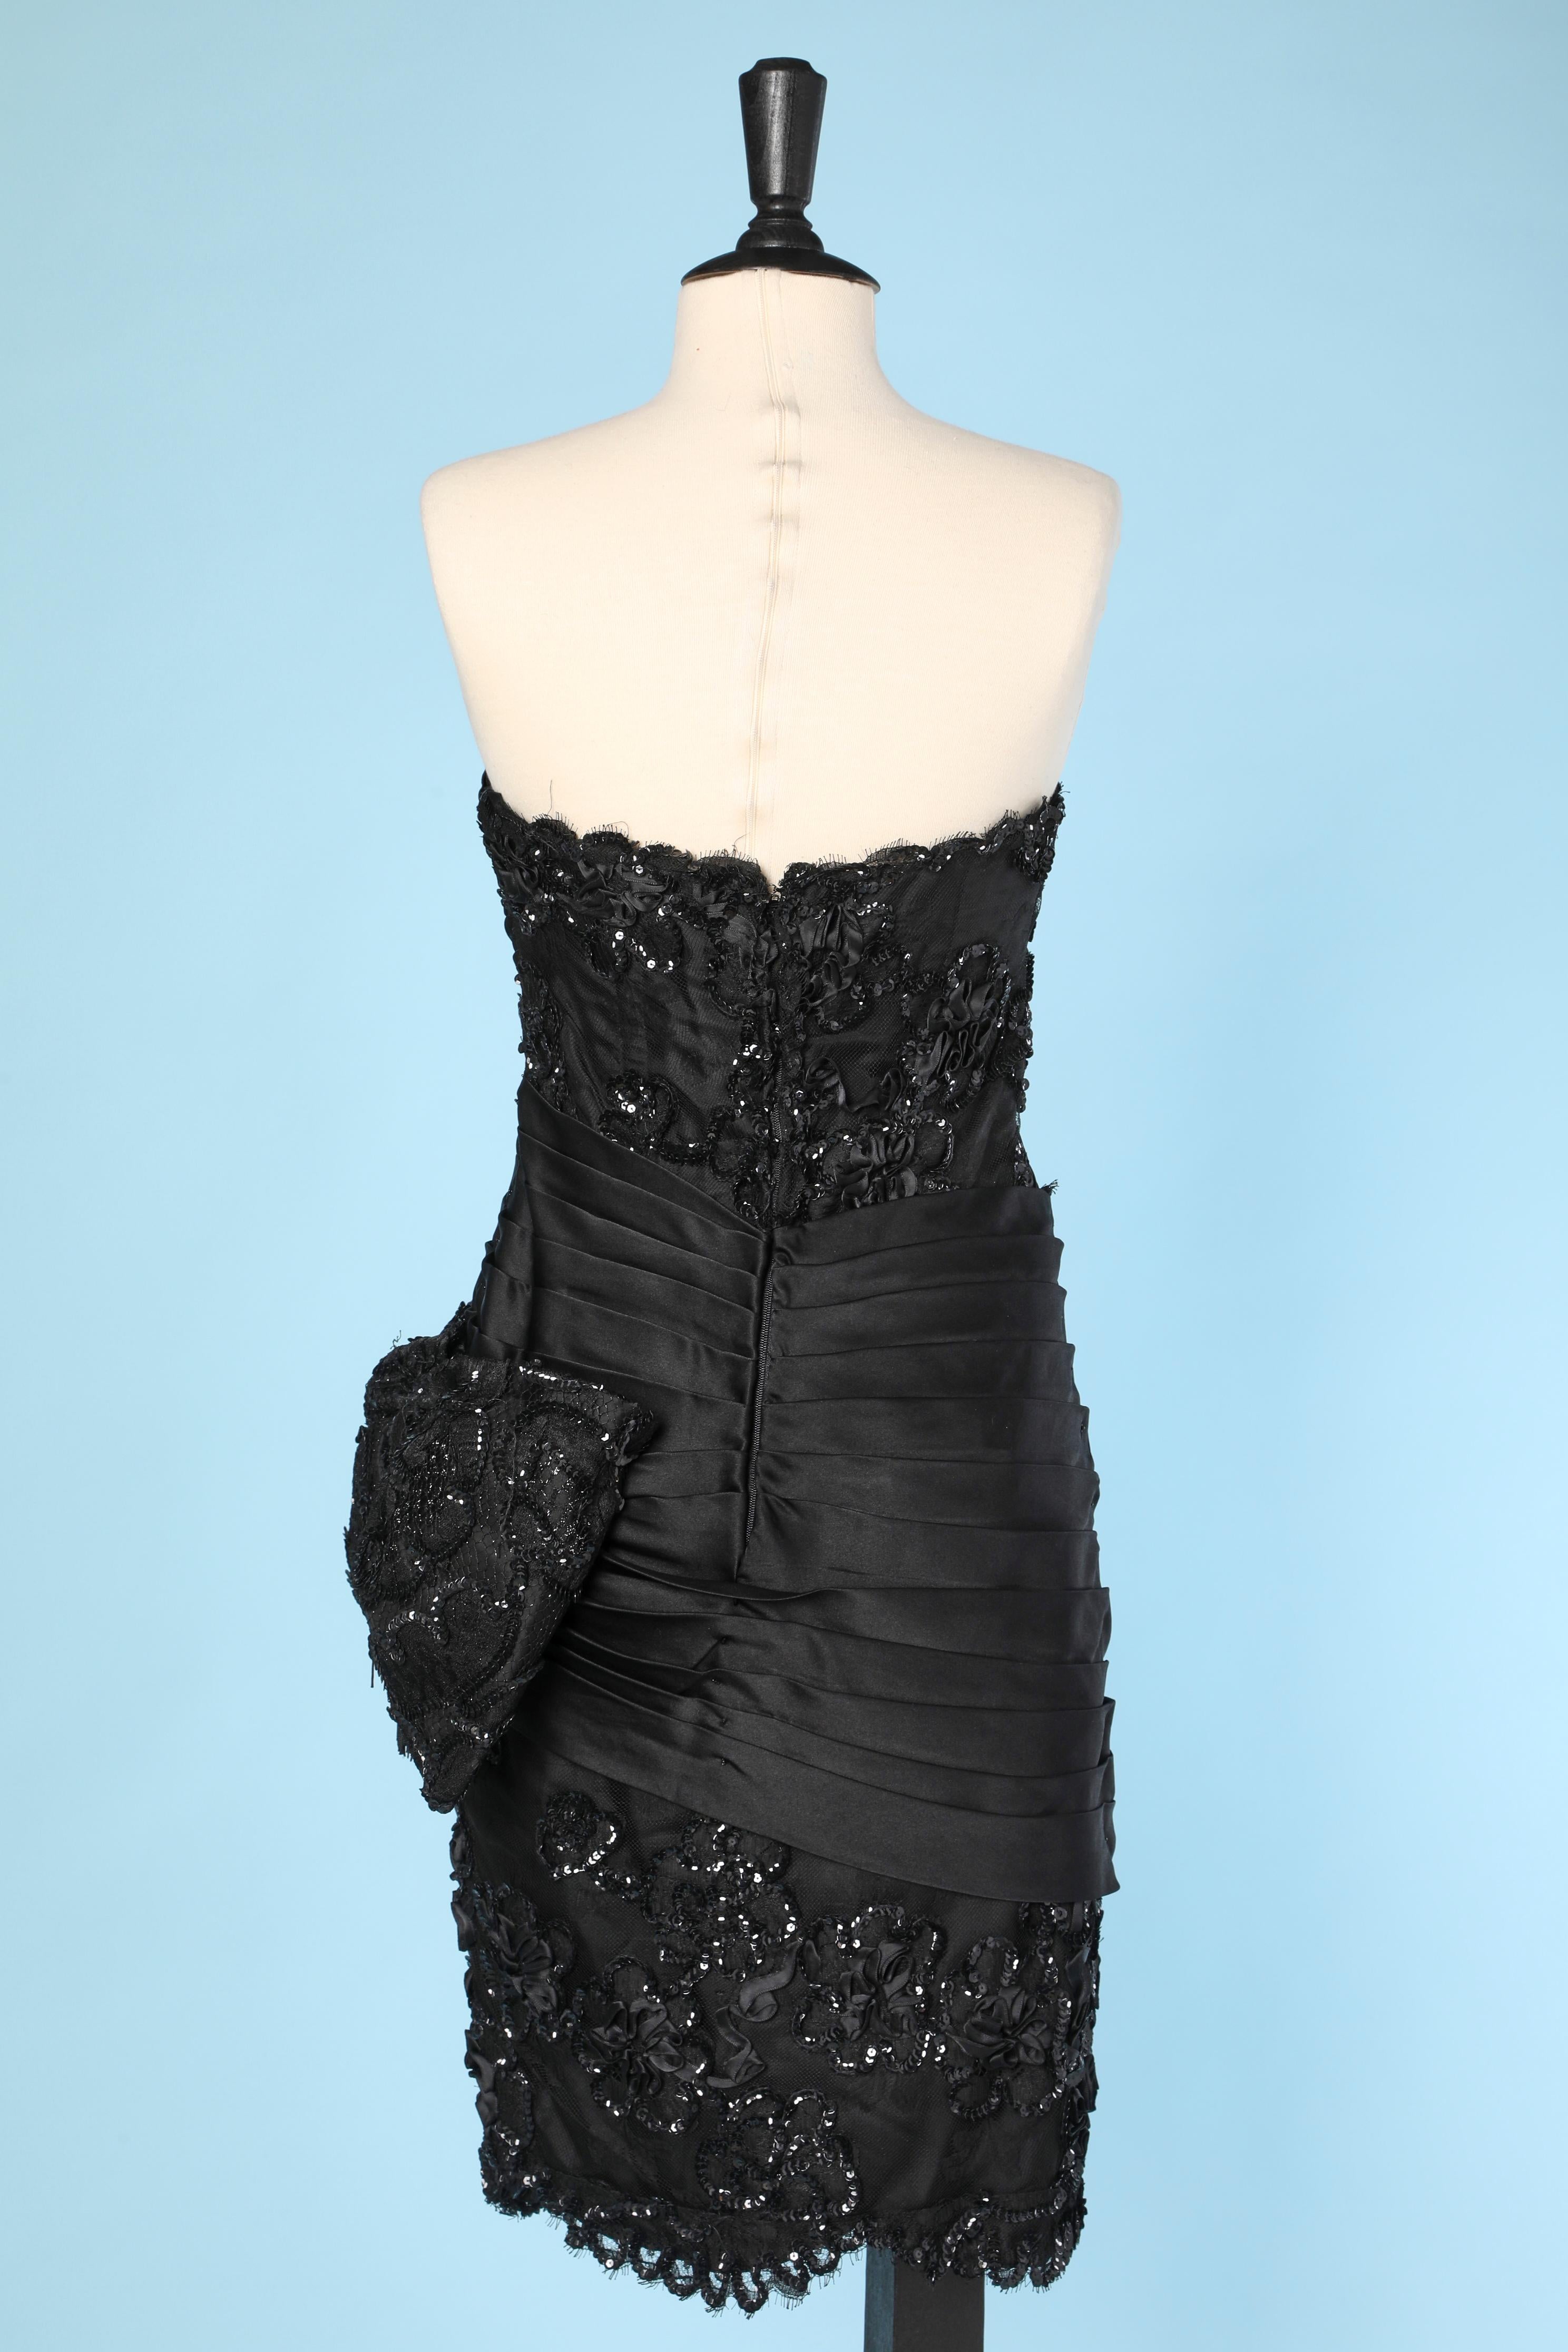 Evening bustier dress in black satin and embroidered lace Pénélope Zagora  In Excellent Condition For Sale In Saint-Ouen-Sur-Seine, FR